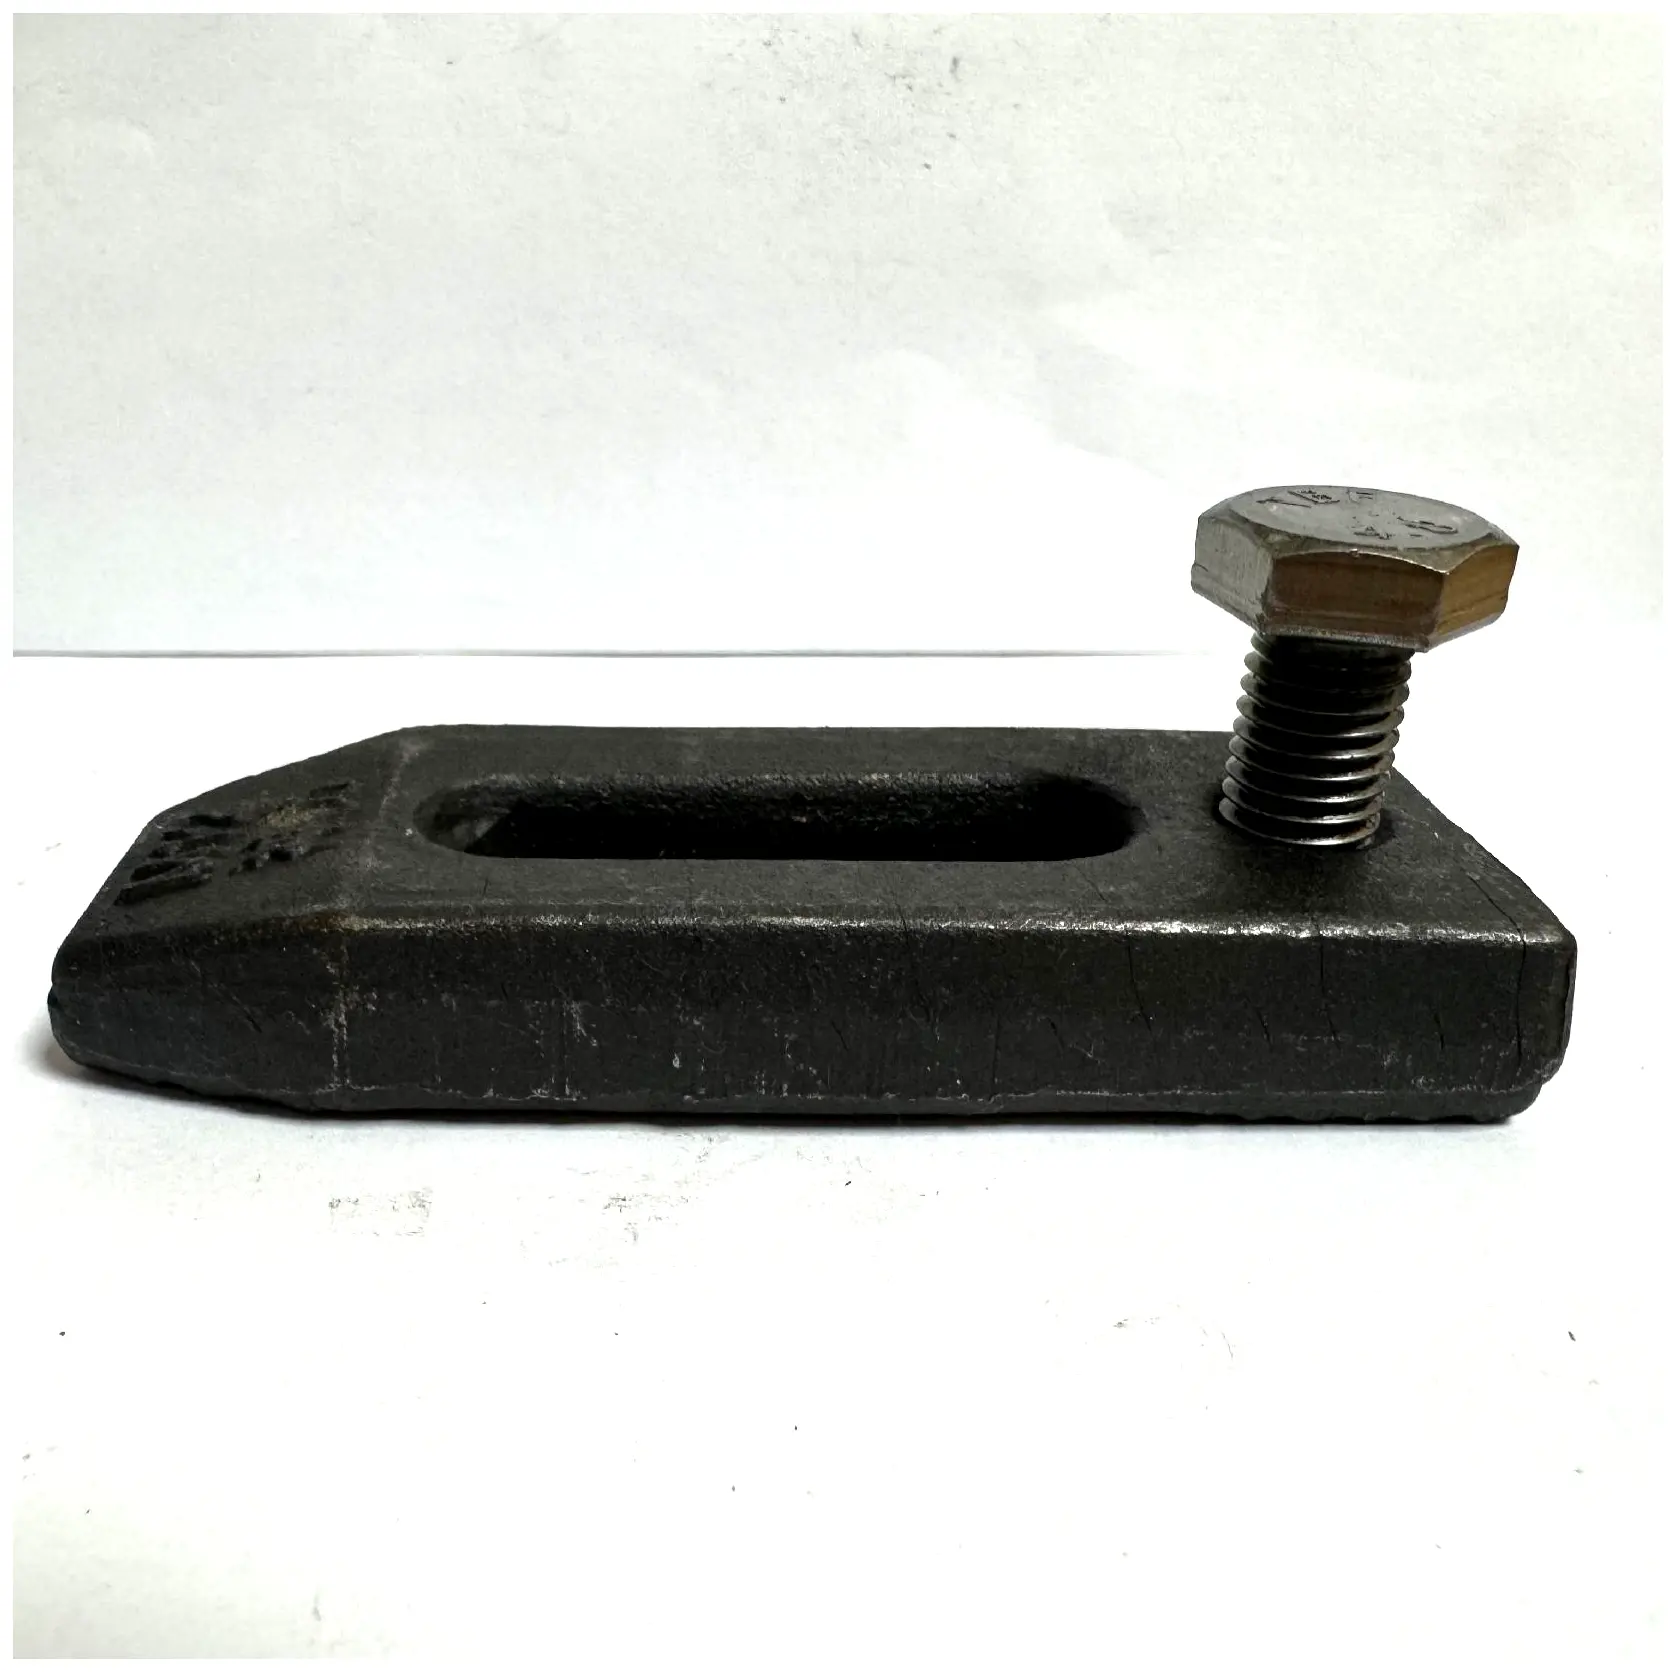 High Pressure Strength Plate Clamp Fixture Plate for T-Slot Working Table Engraving Machine Steel Flat Clamp for Moulds